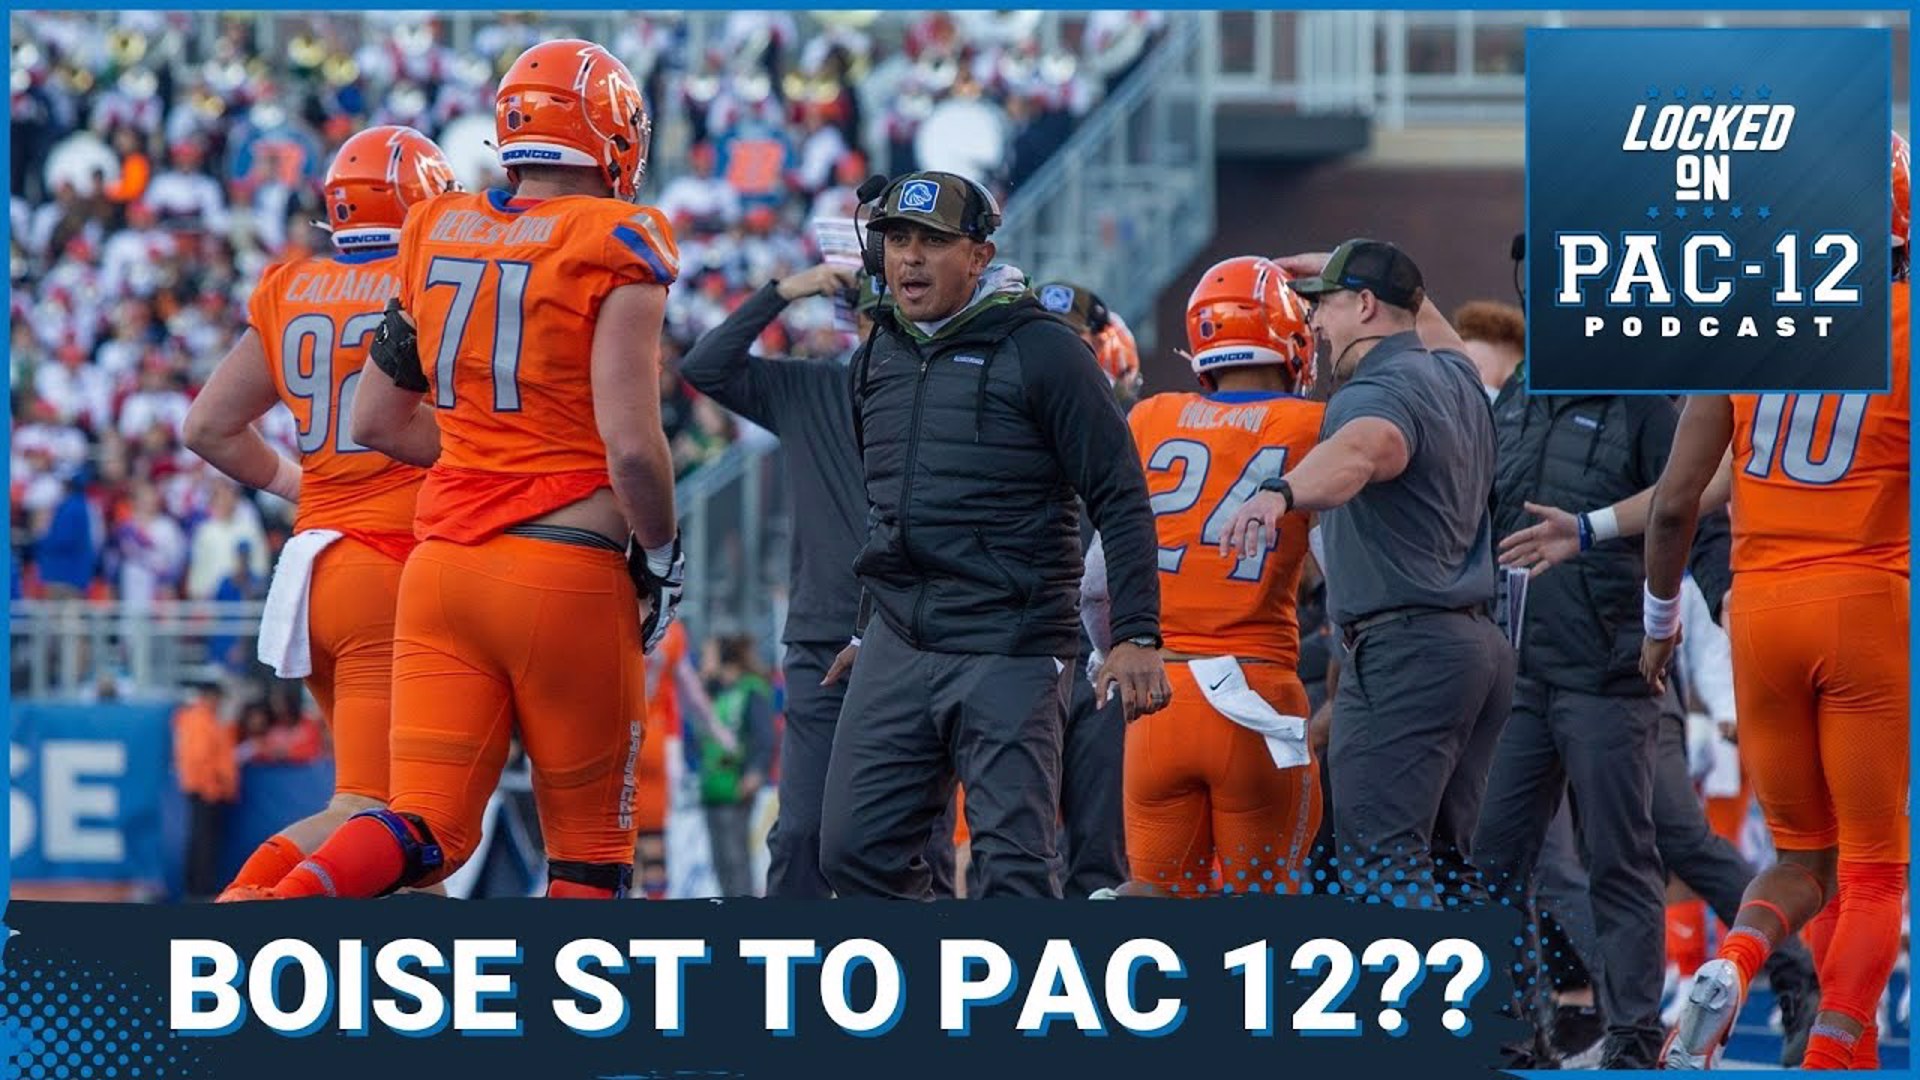 Boise State is one of the largest G5 brands out West. Where is the program at now, located in the heart of Pac-12 country, as the league mulls expansion?